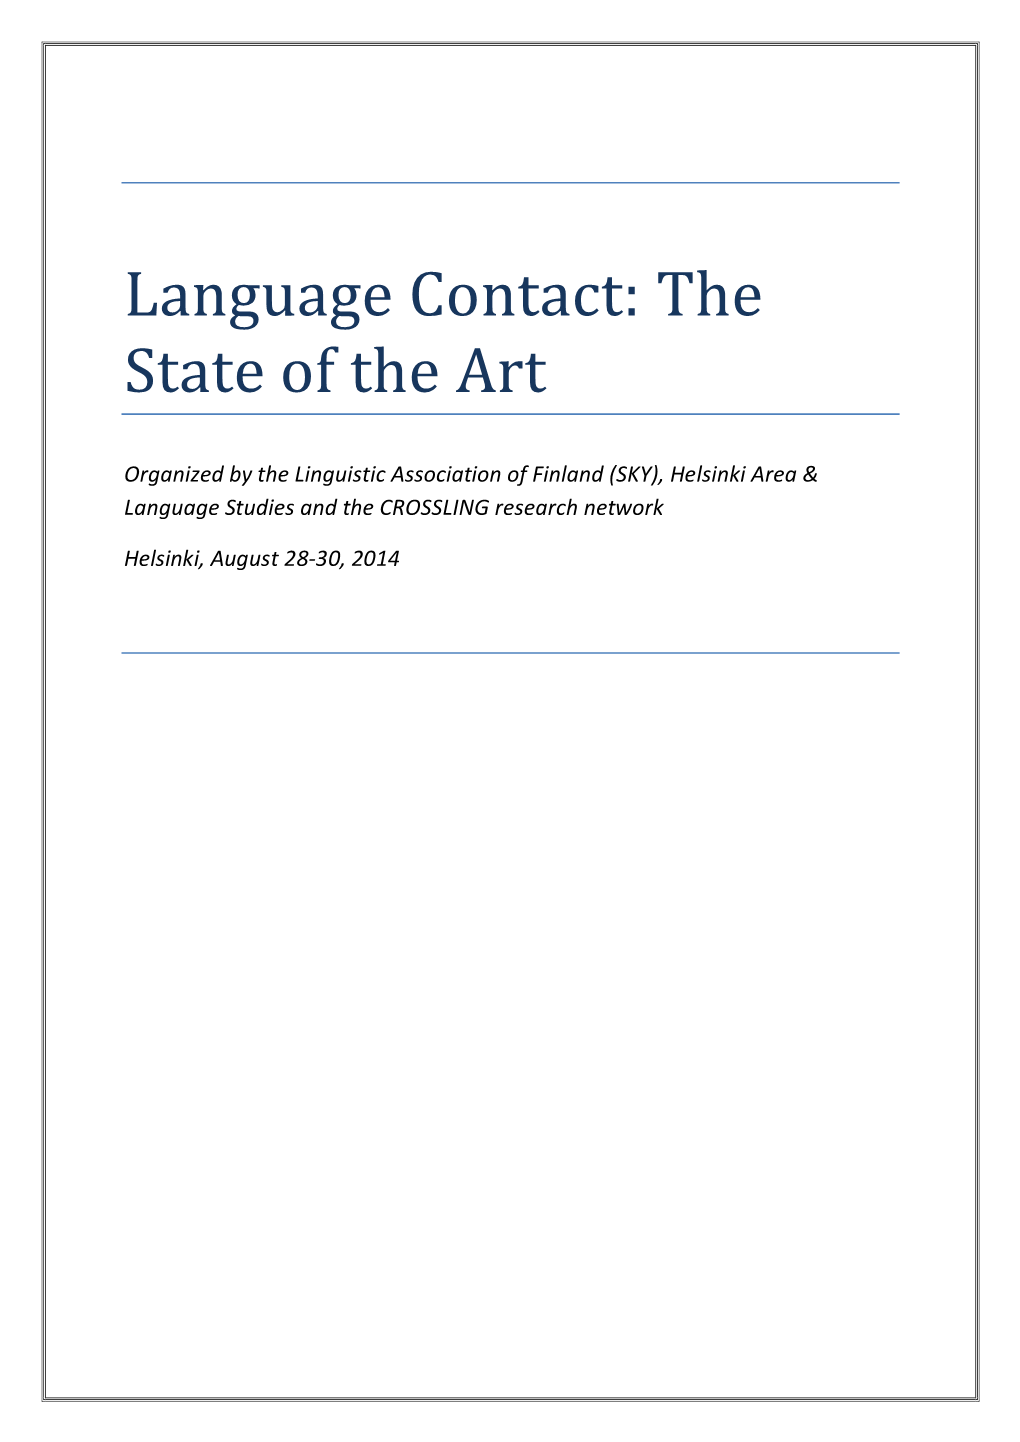 Language Contact: the State of The